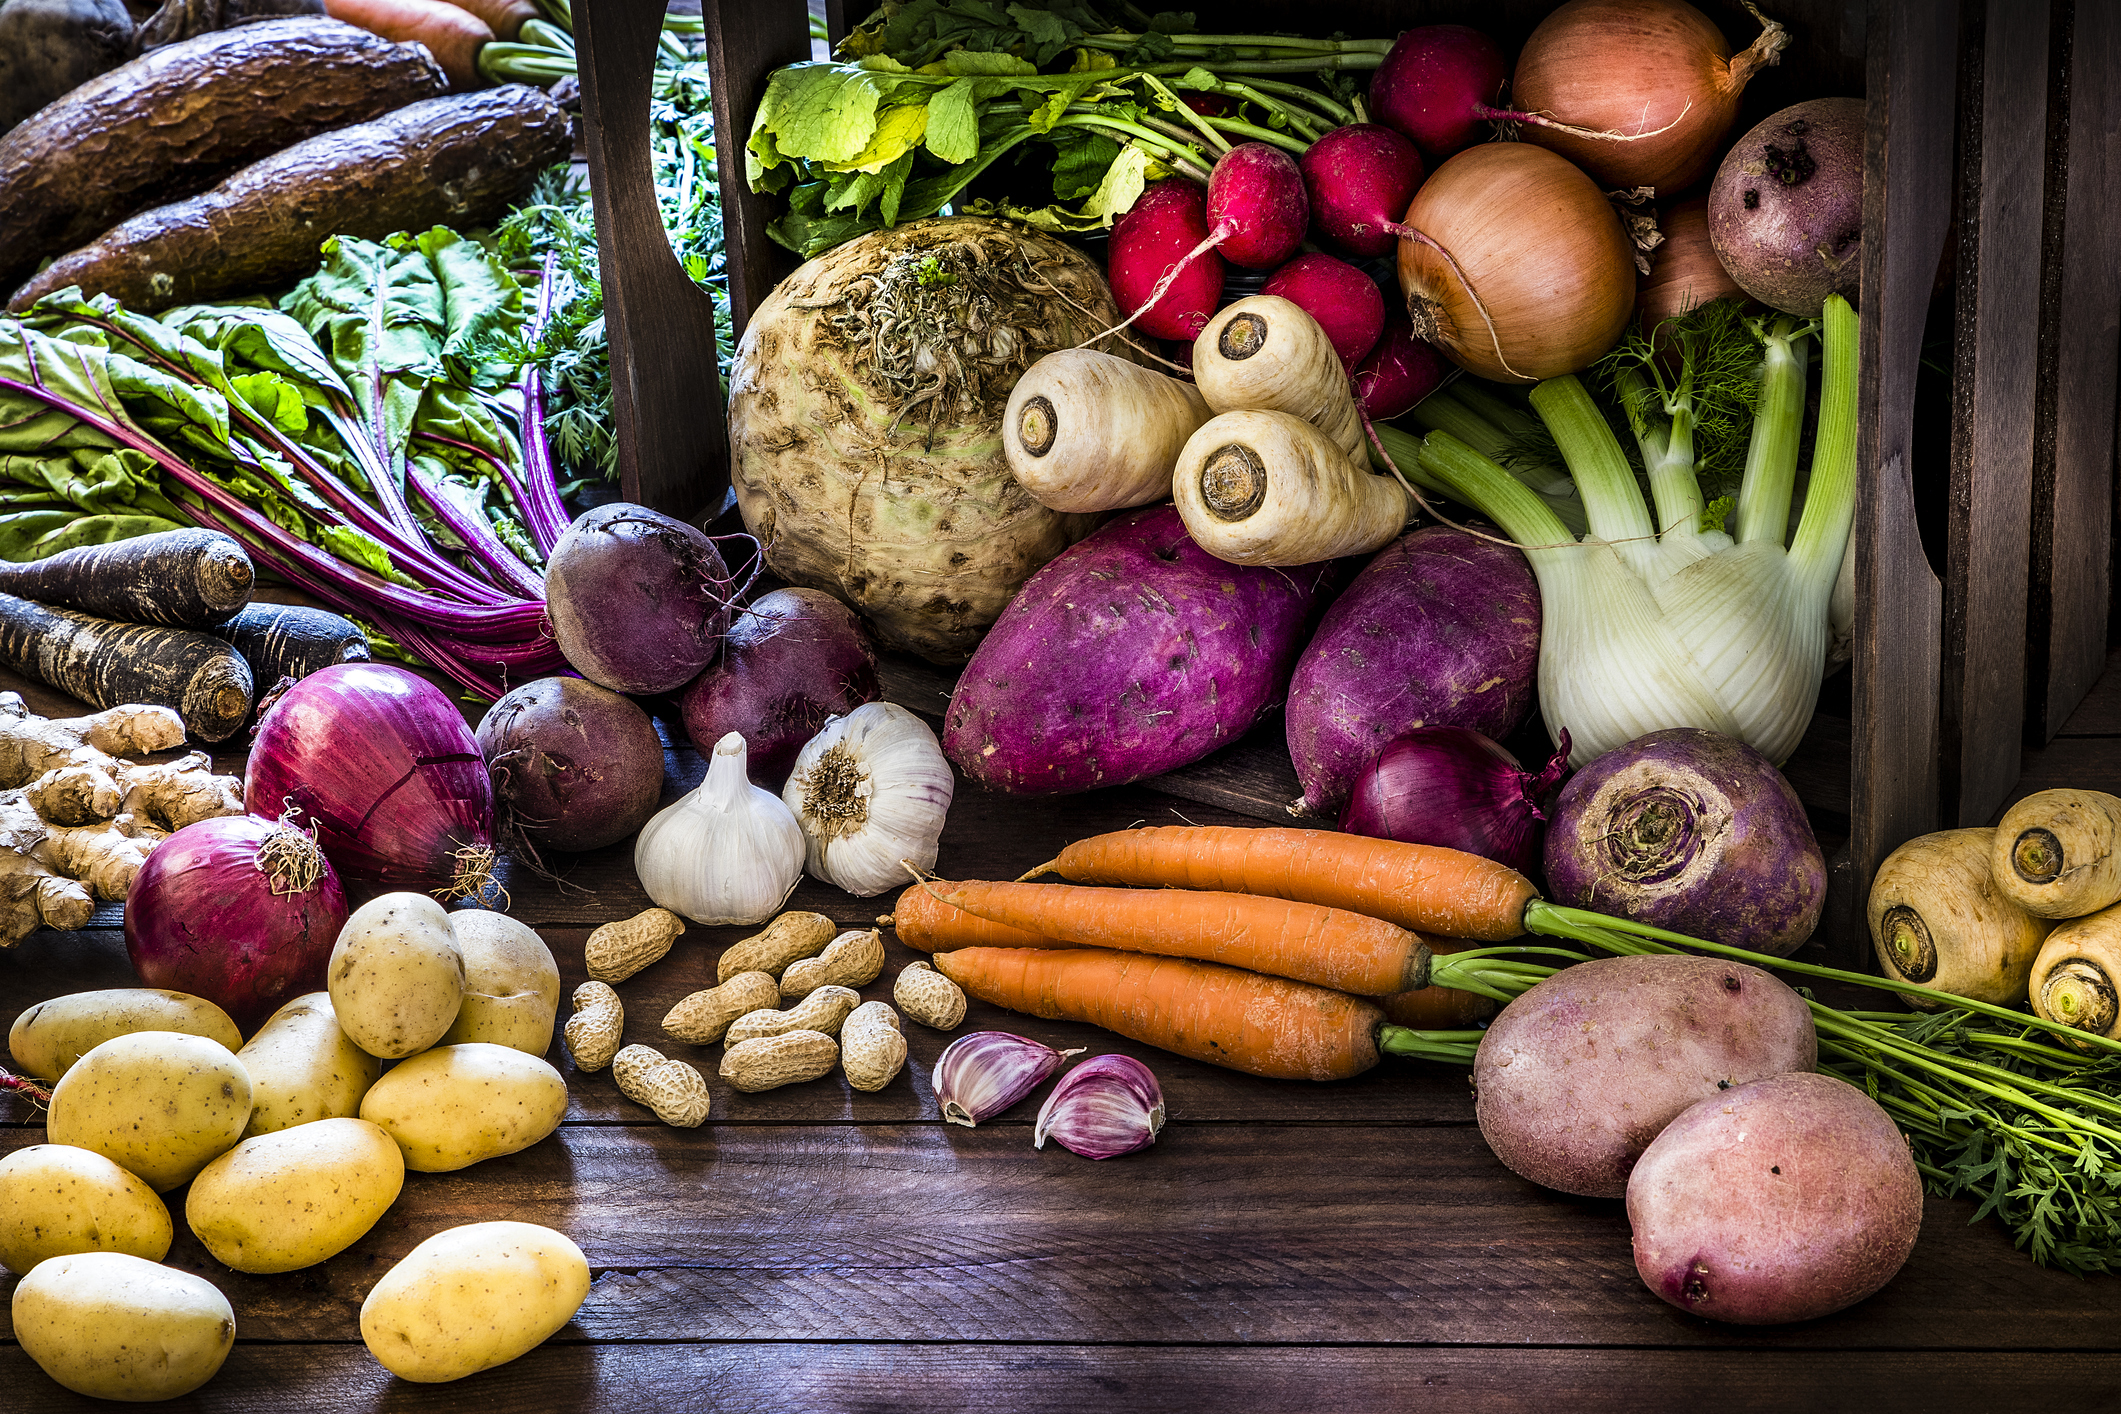 How to make a habit of eating more vegetables